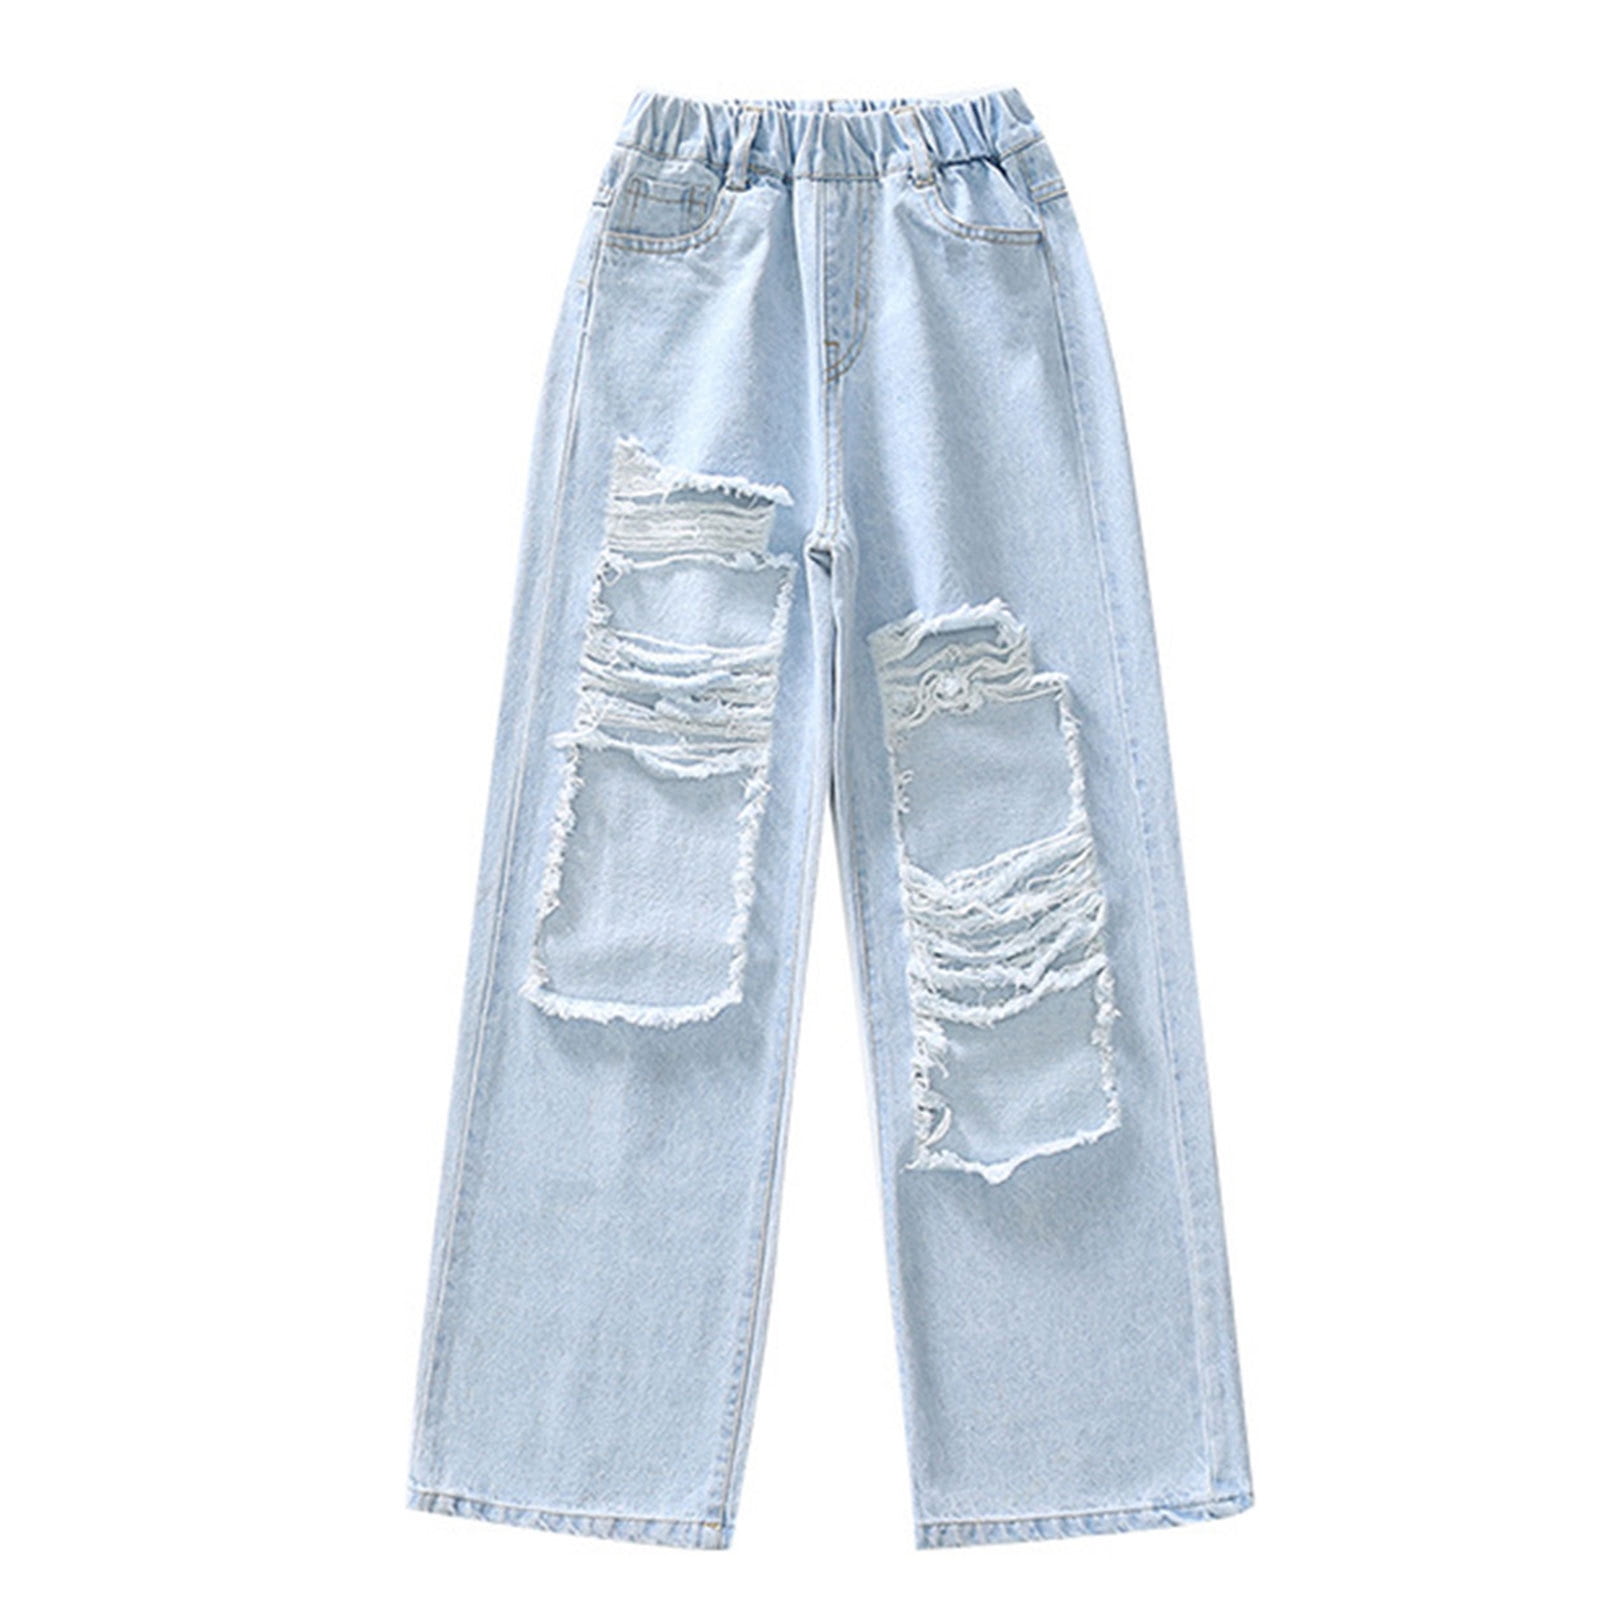 DPOIS Kids High Waisted Ripped Jeans Girls Casual Loose Fit Distressed  Denim Pants Blue 13-15